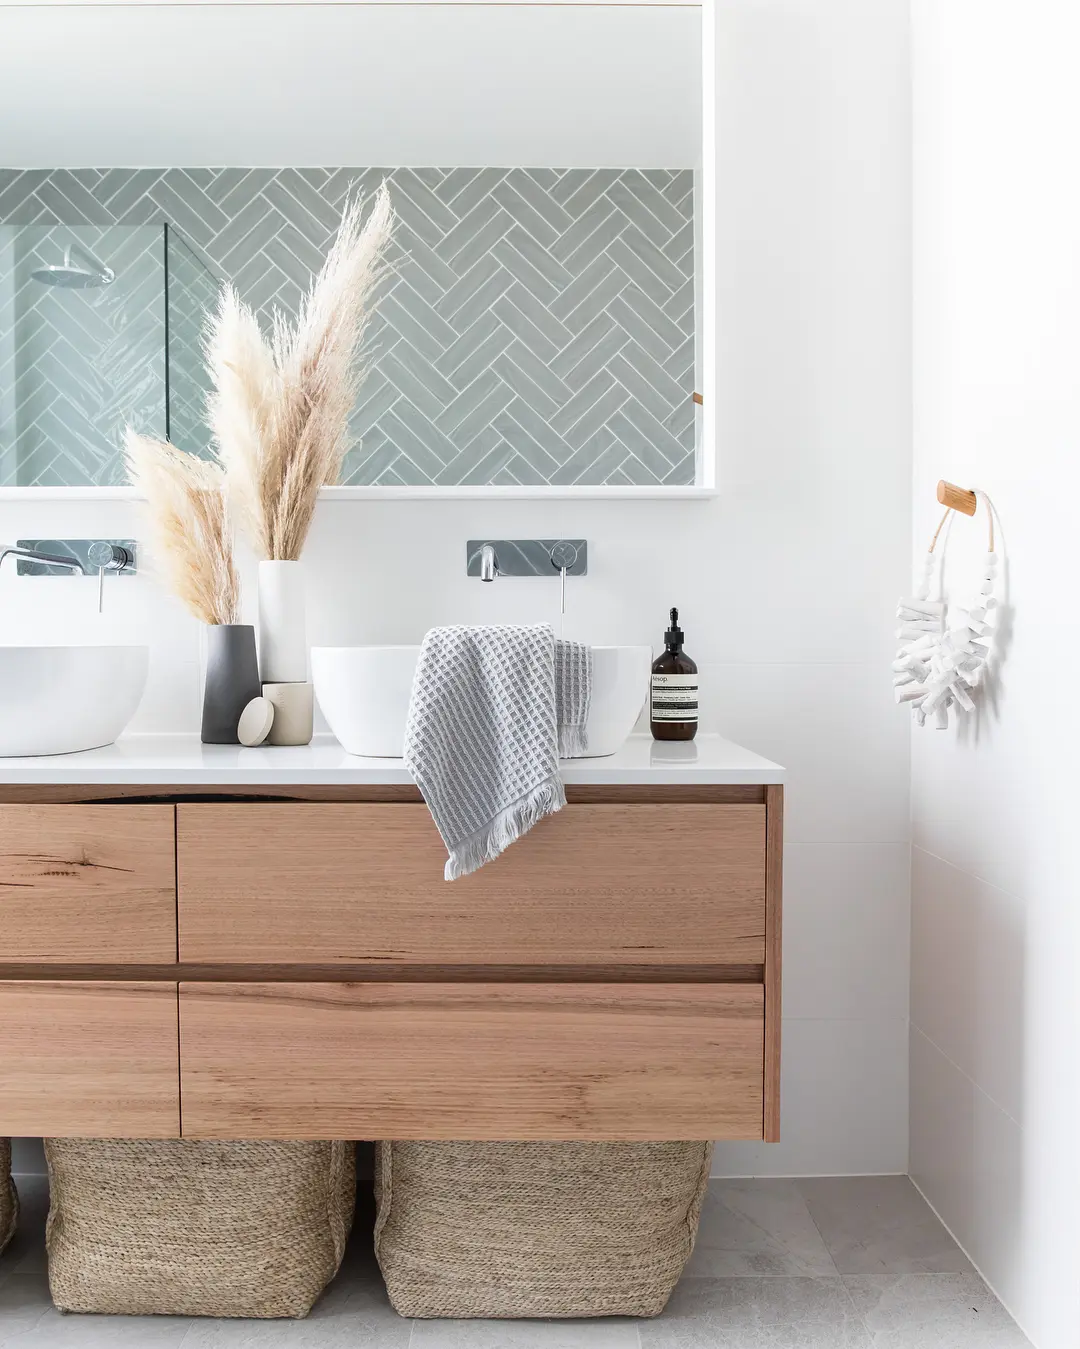 A modern Coastal Boho bathroom features a wooden vanity, double sinks, a large mirror, a herringbone-tiled backsplash, and decorative pampas grass in a vase. Woven baskets are stored under the vanity to complete this serene retreat.